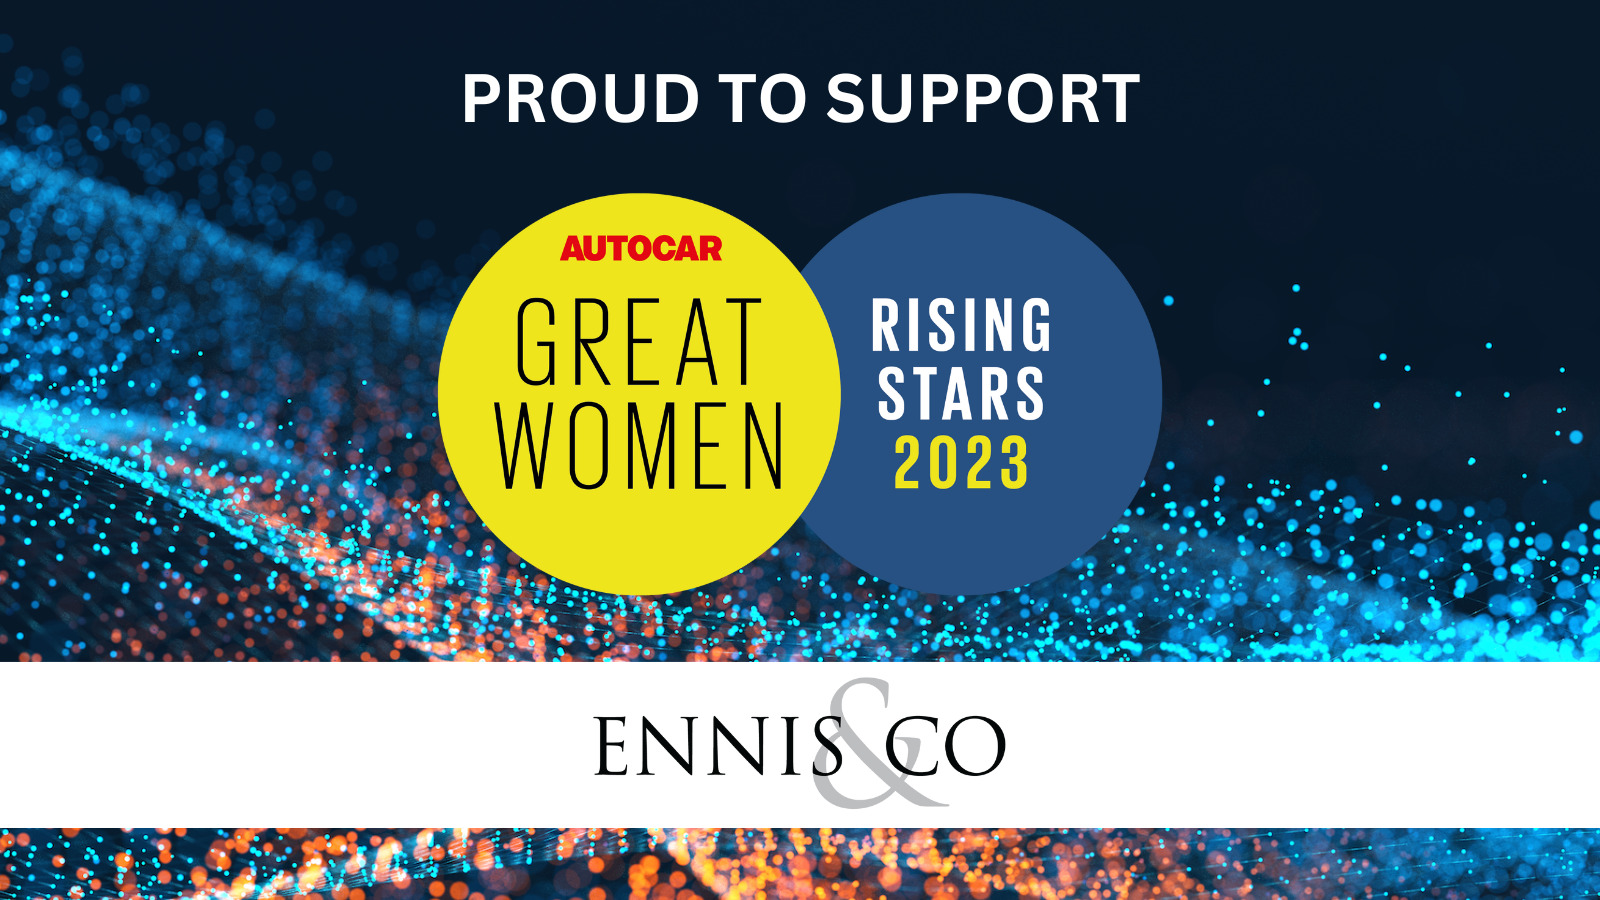 Proud to support Autocar Great Women : Rising Stars 2023